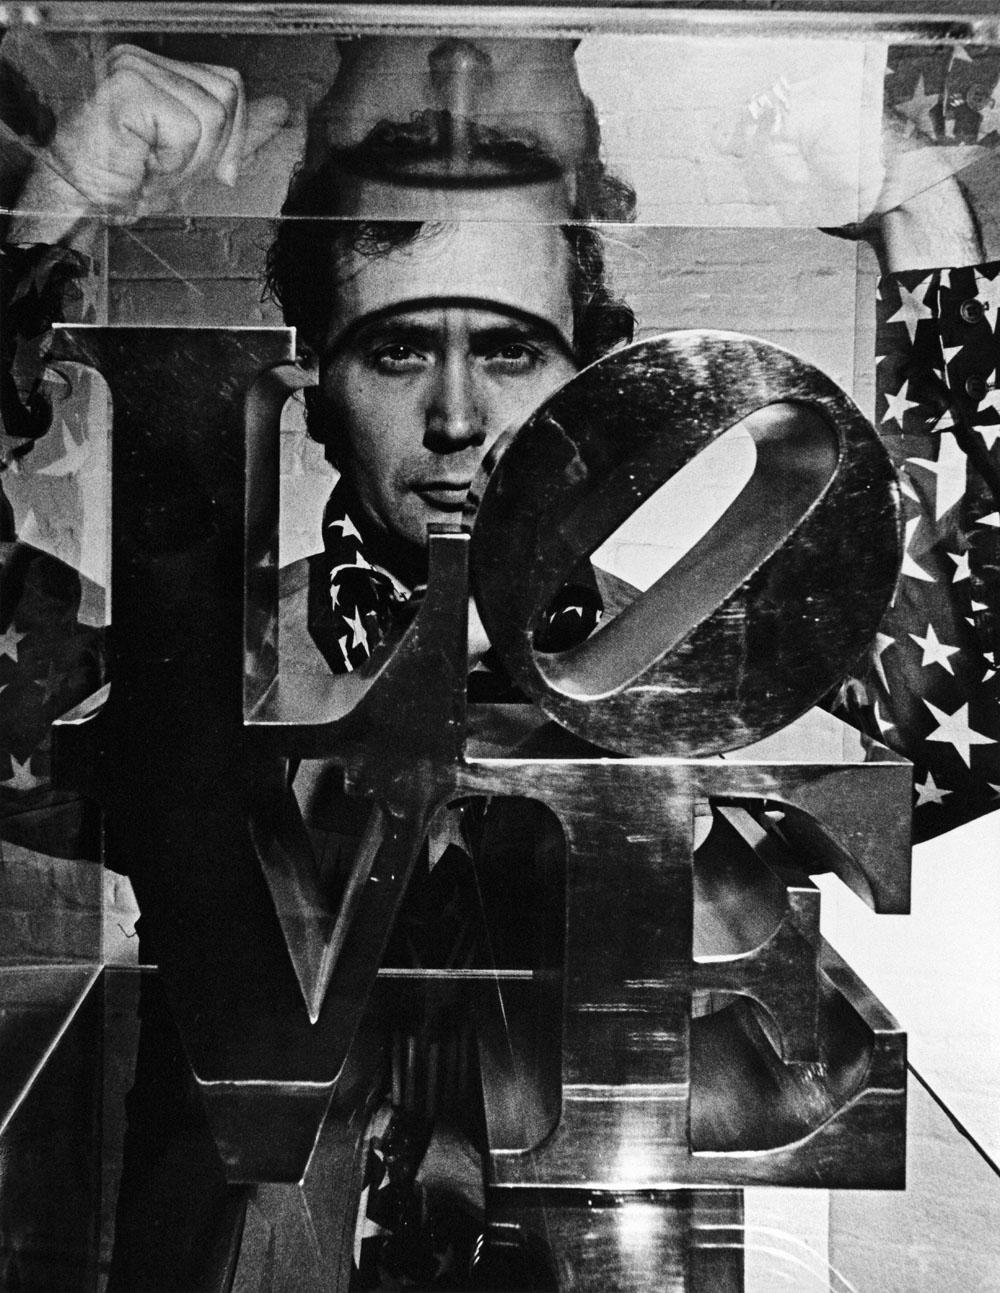   Artist Robert Indiana with his LOVE sculpture, signed By Jack Mitchell 